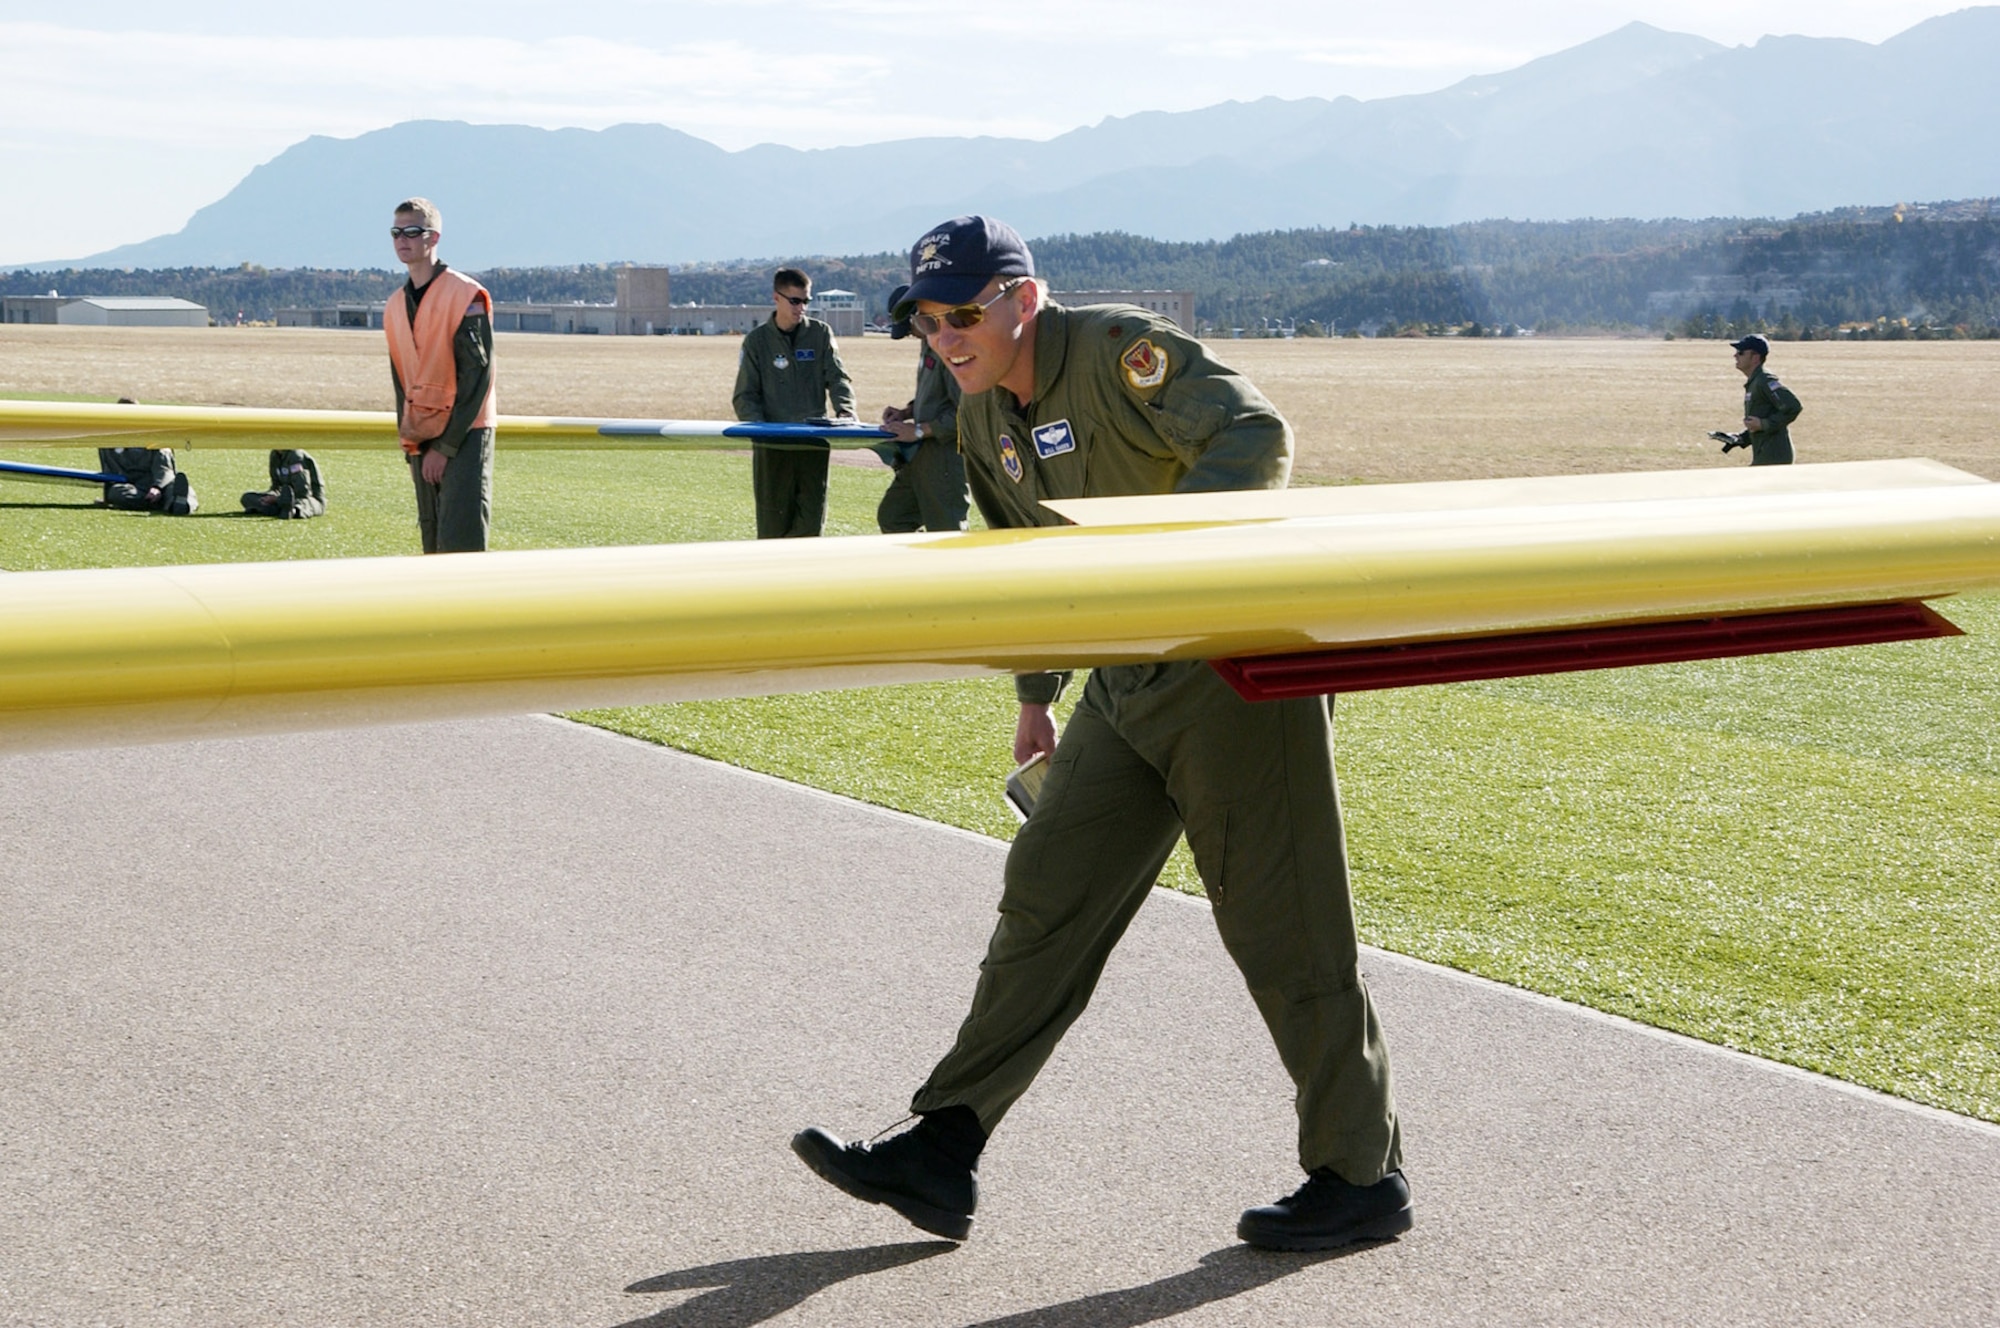 Major Bill Gagen performs a walk-around check of a glider before takeoff recently at the U.S. Air Force Academy in Colorado Springs, Colo.  Major Gagen and about 30 other Reservists formed for the squadron recently giving Reservists a more prominent role in training cadets at the school. (Photo by Tech. Sgt. Jason Tudor)